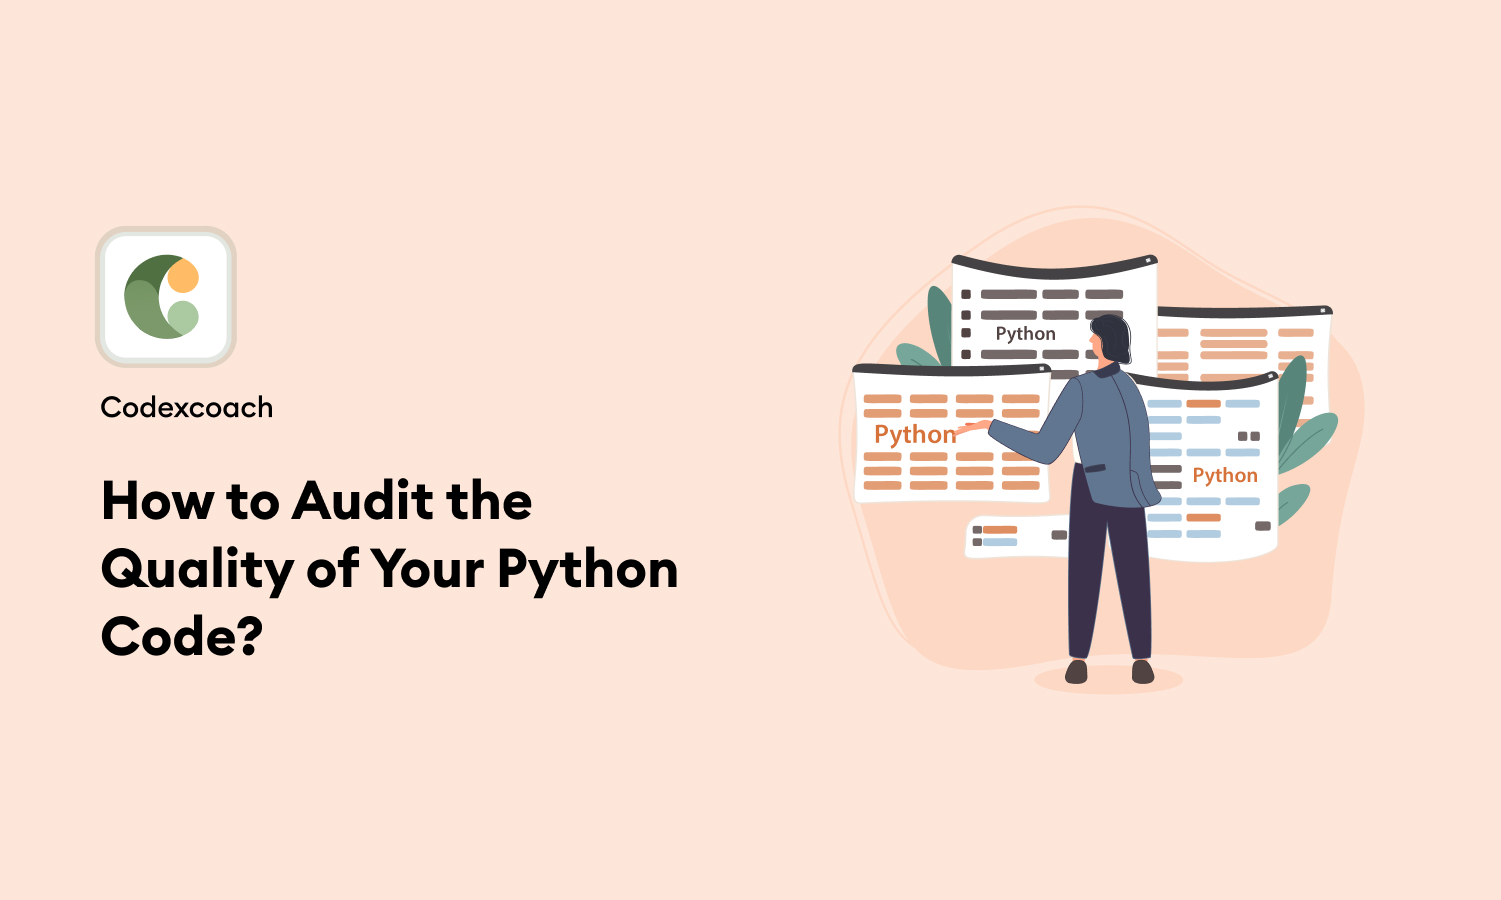 How to Audit the Quality of Your Python Code?